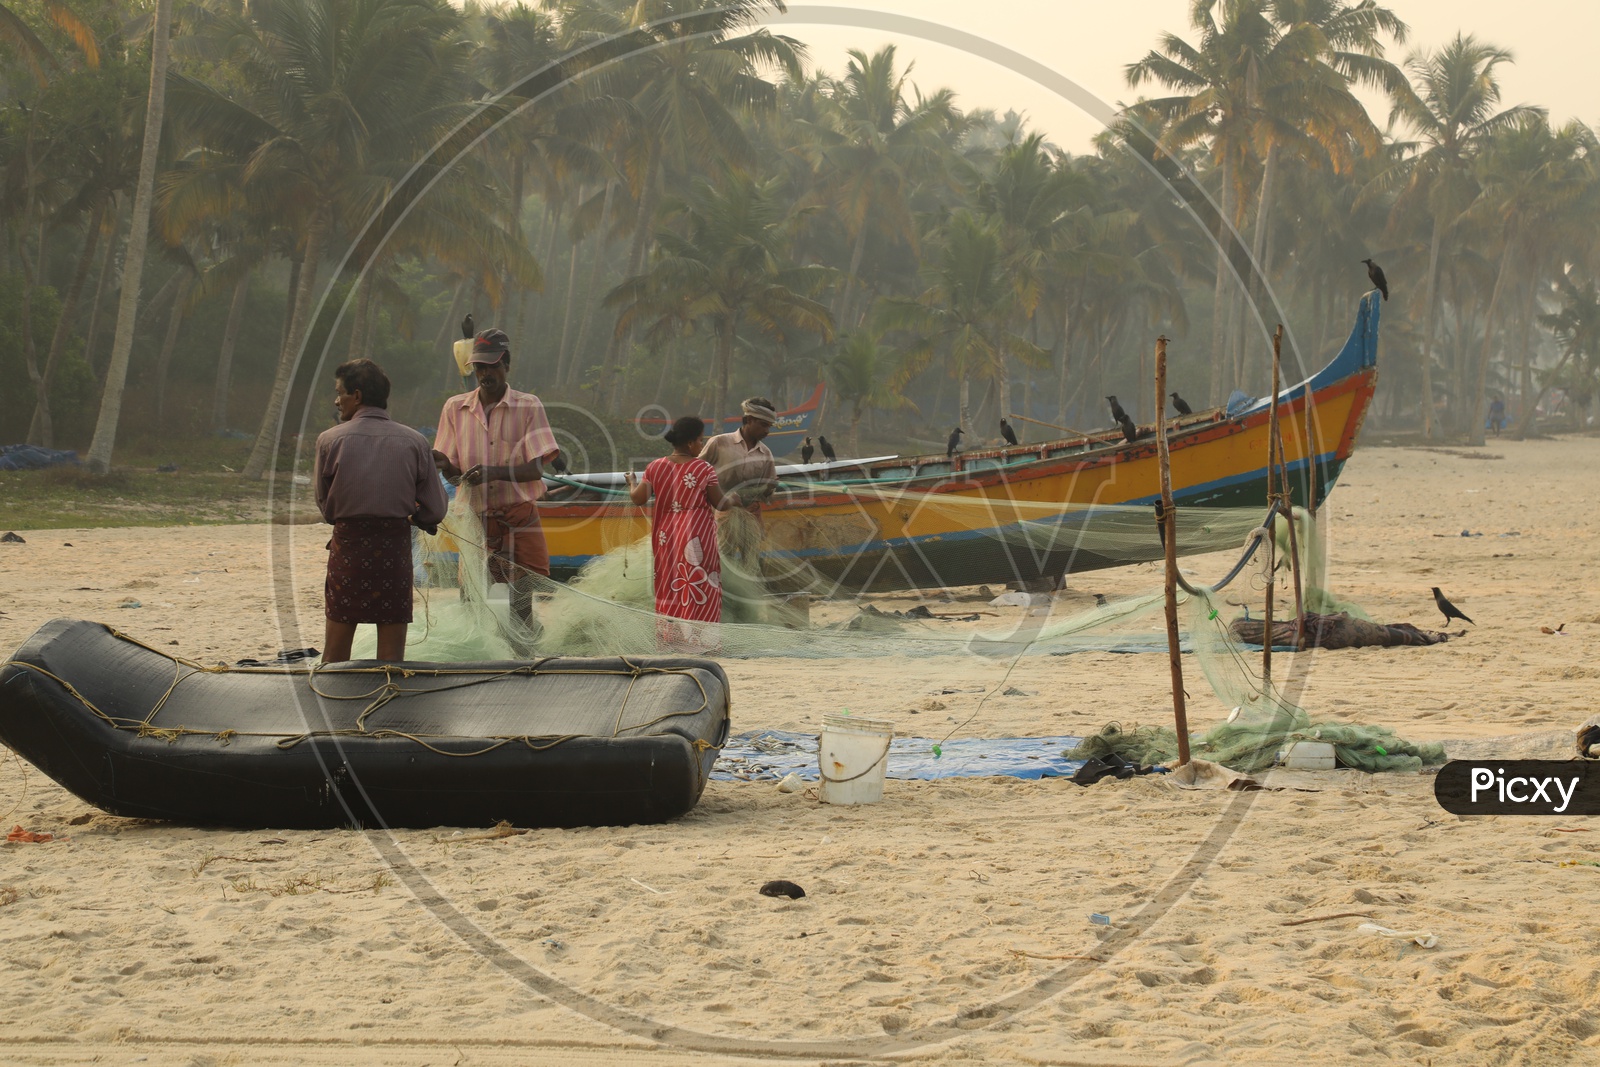 fishers with fishing net in the beach